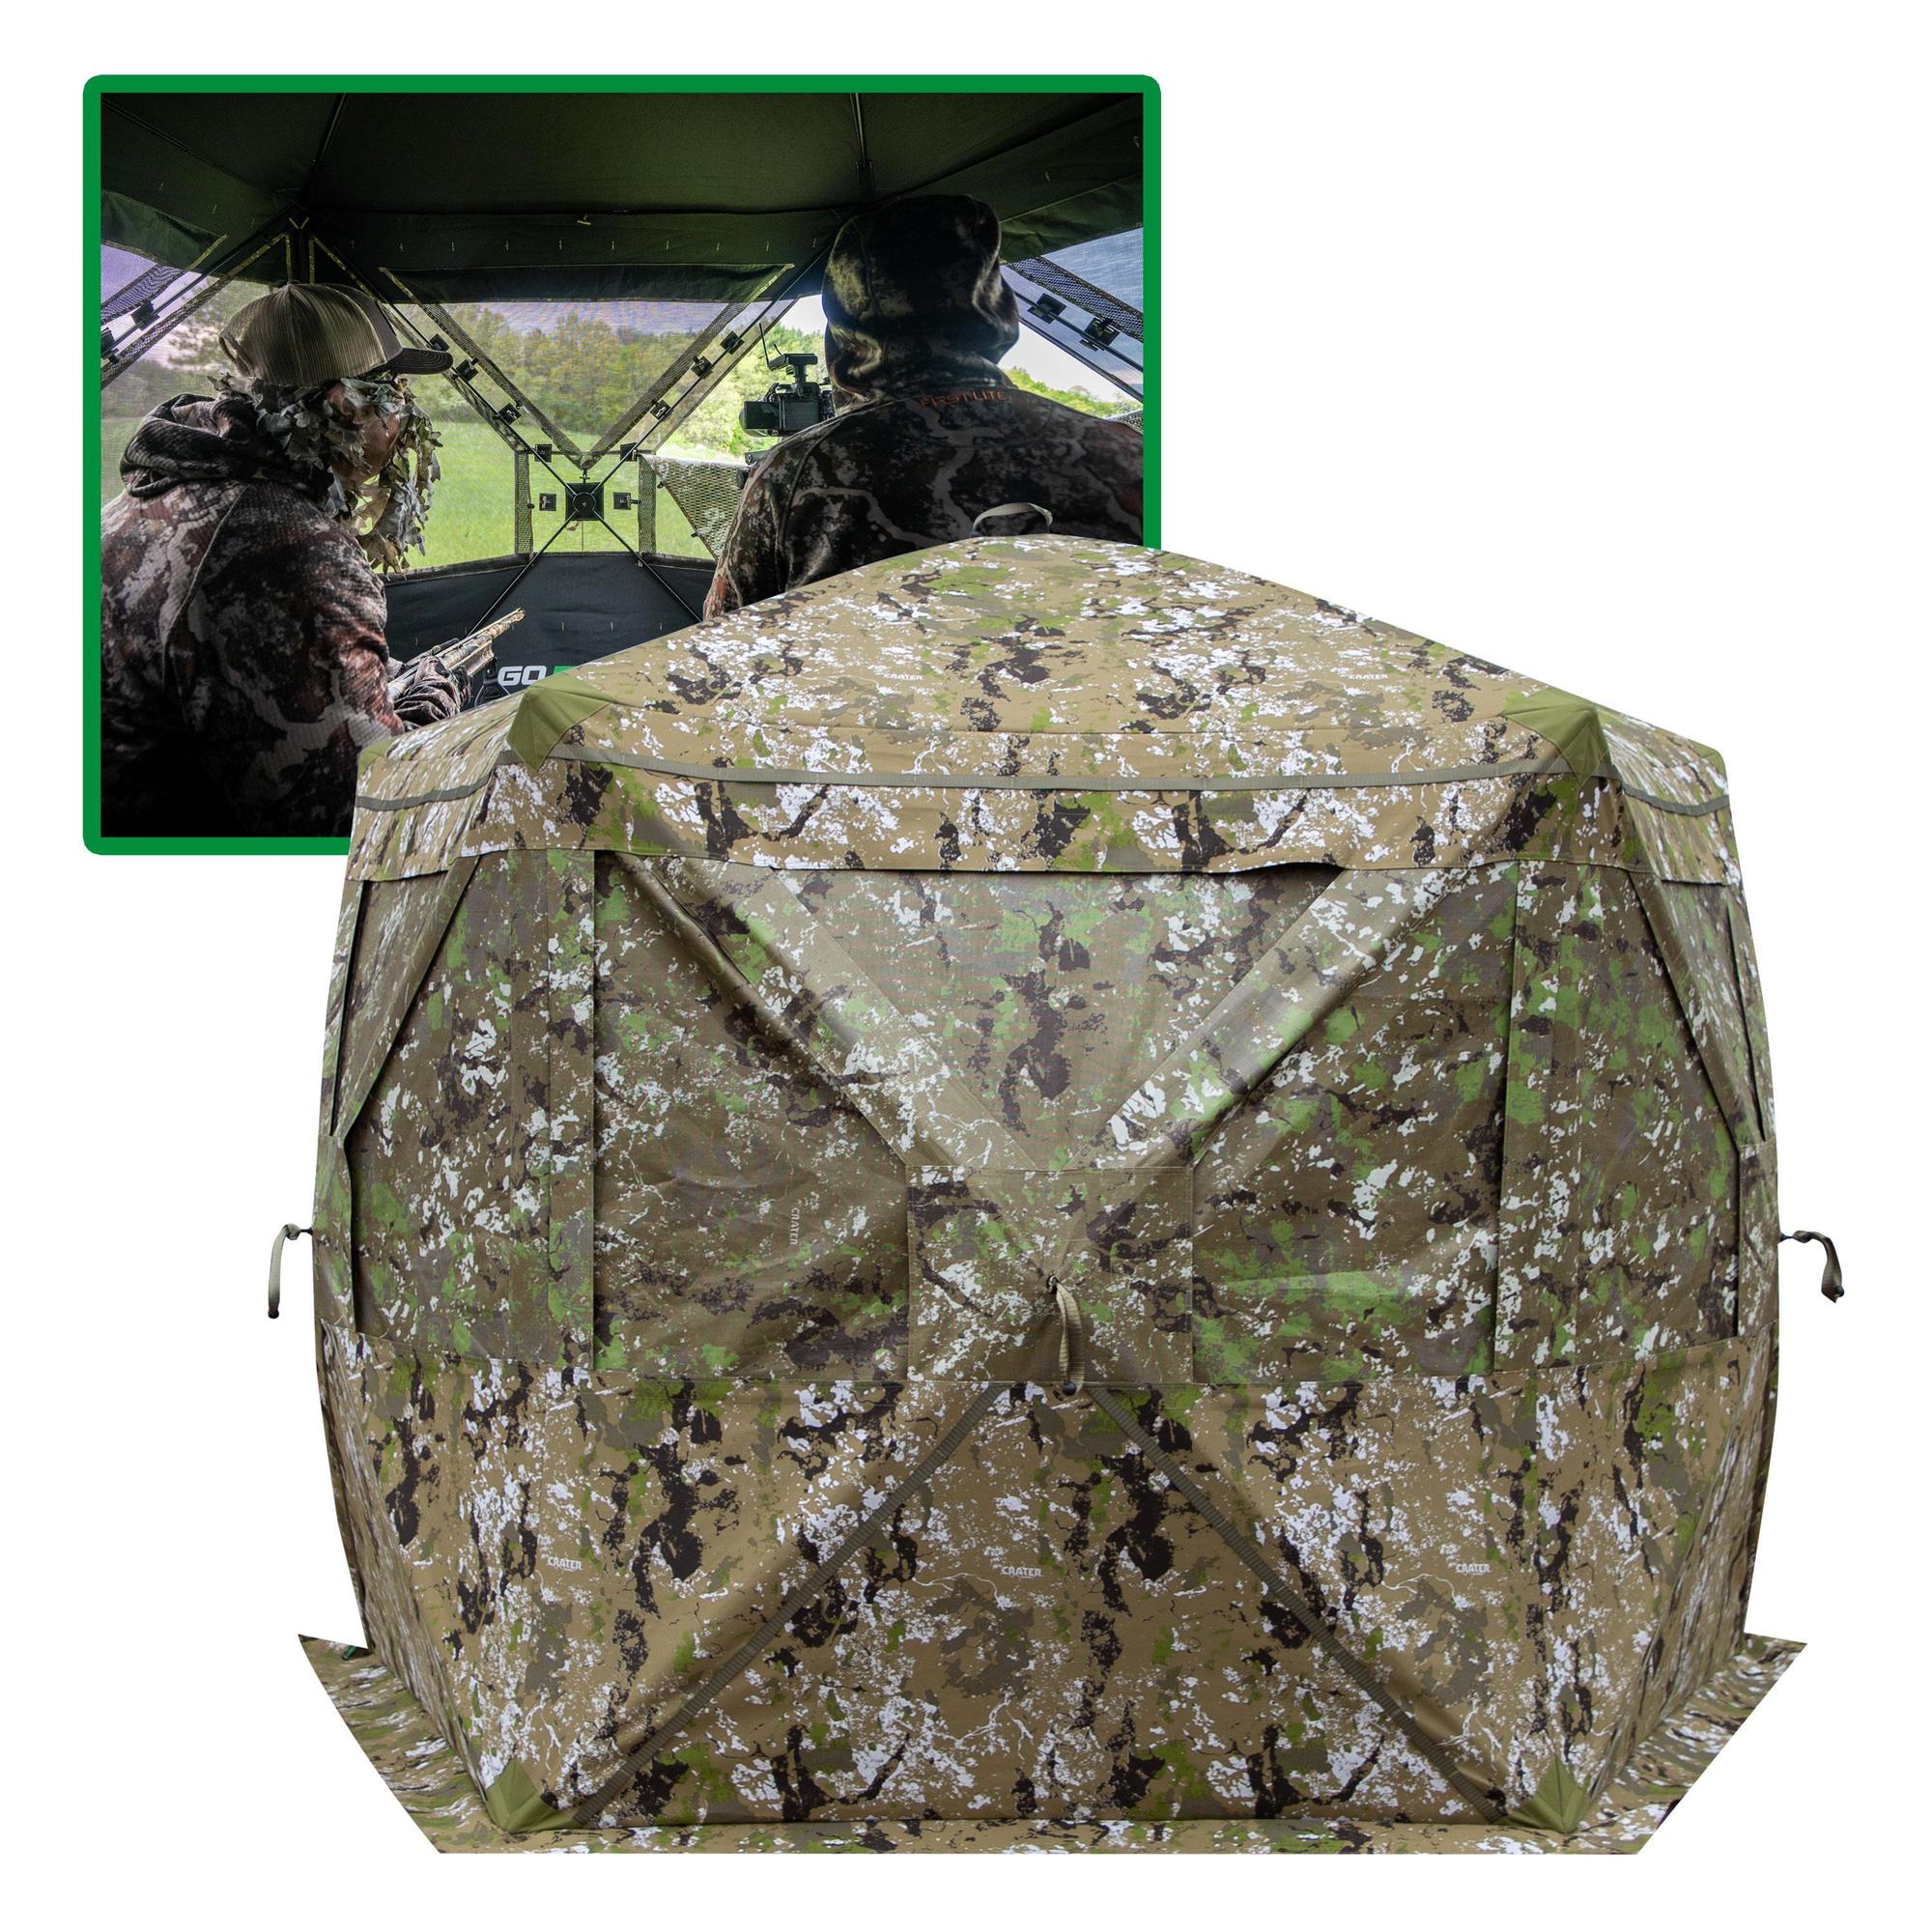 Barronett Blinds, Hi-Five Portable Hunting Blind, 4-Person Capacity, Color Camouflage, Material Polyester, Model HF550CT